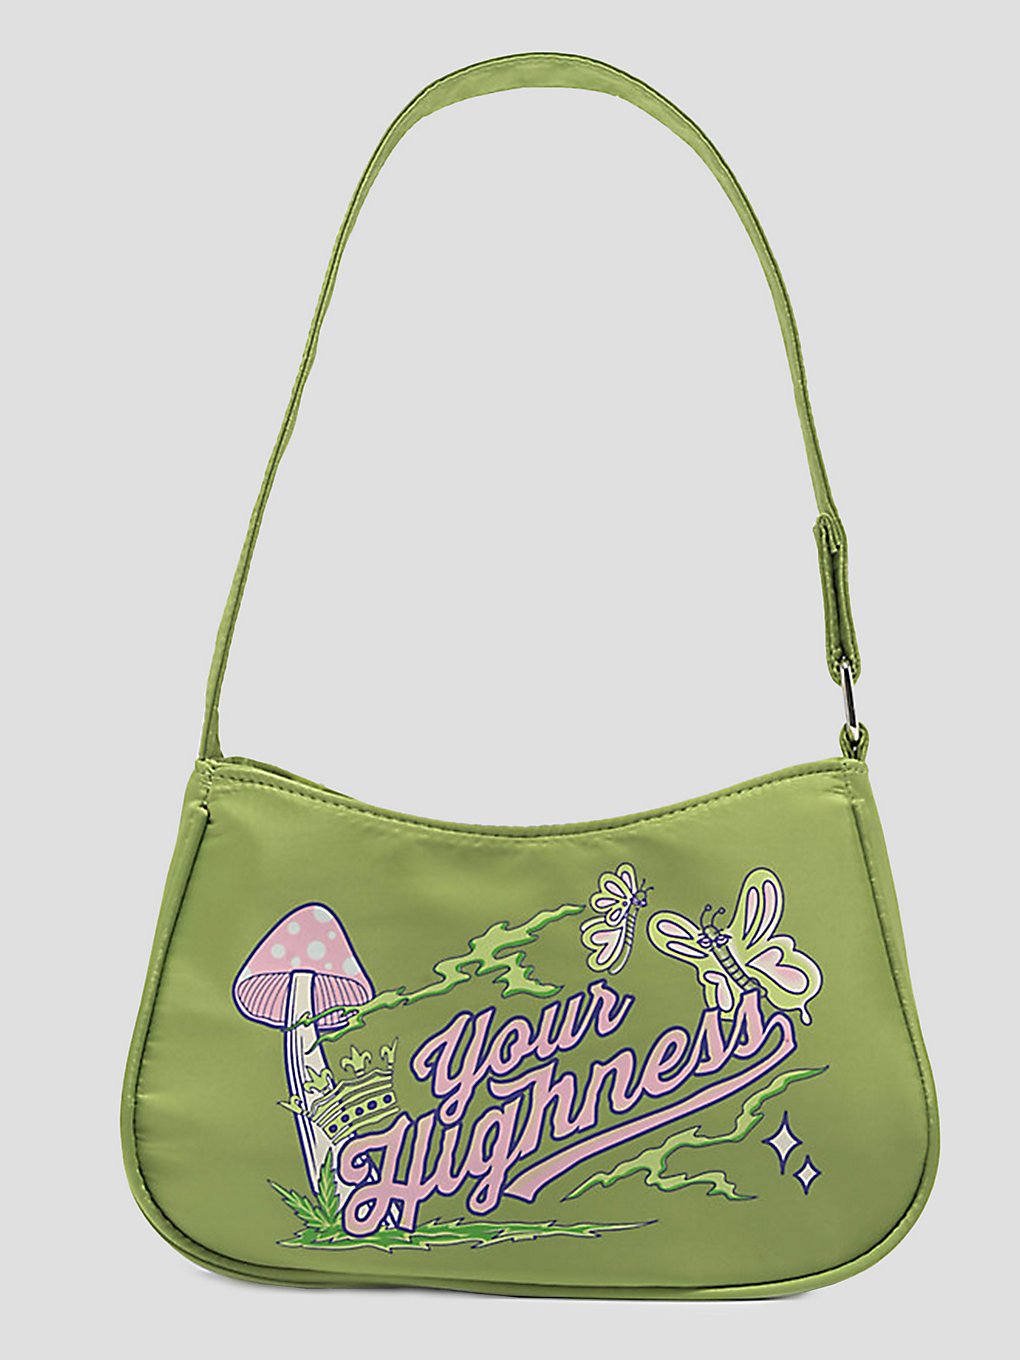 Your Highness Could Be Worse Handtasche green kaufen